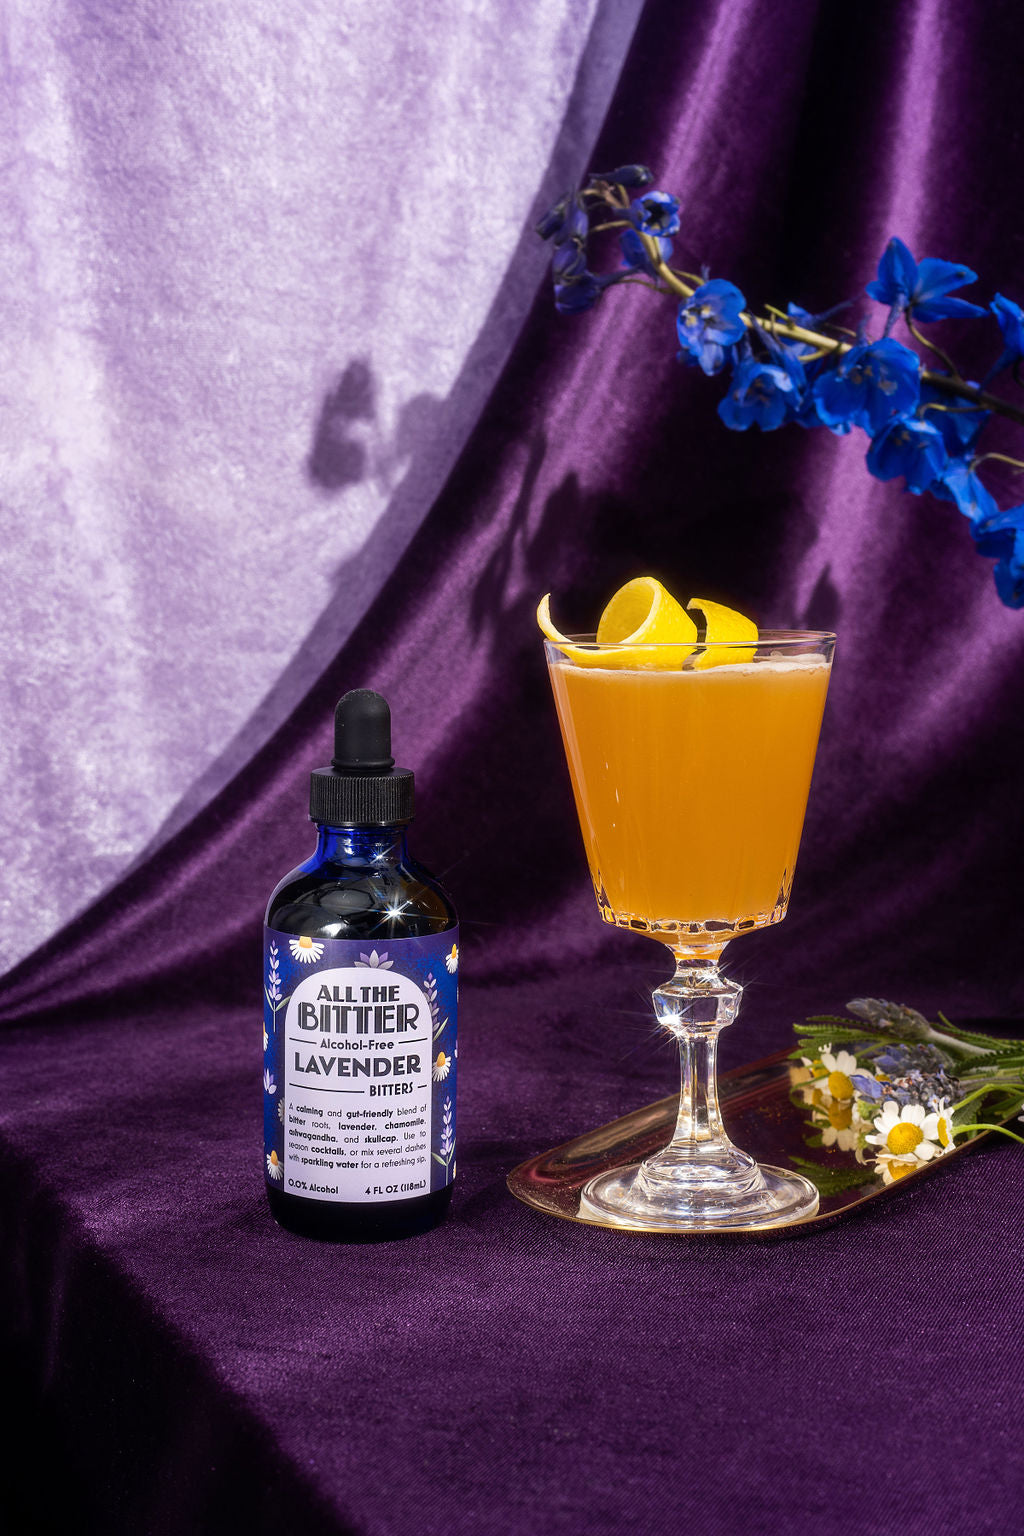 All The Bitter - Lavender Bitters (Non-Alcoholic)